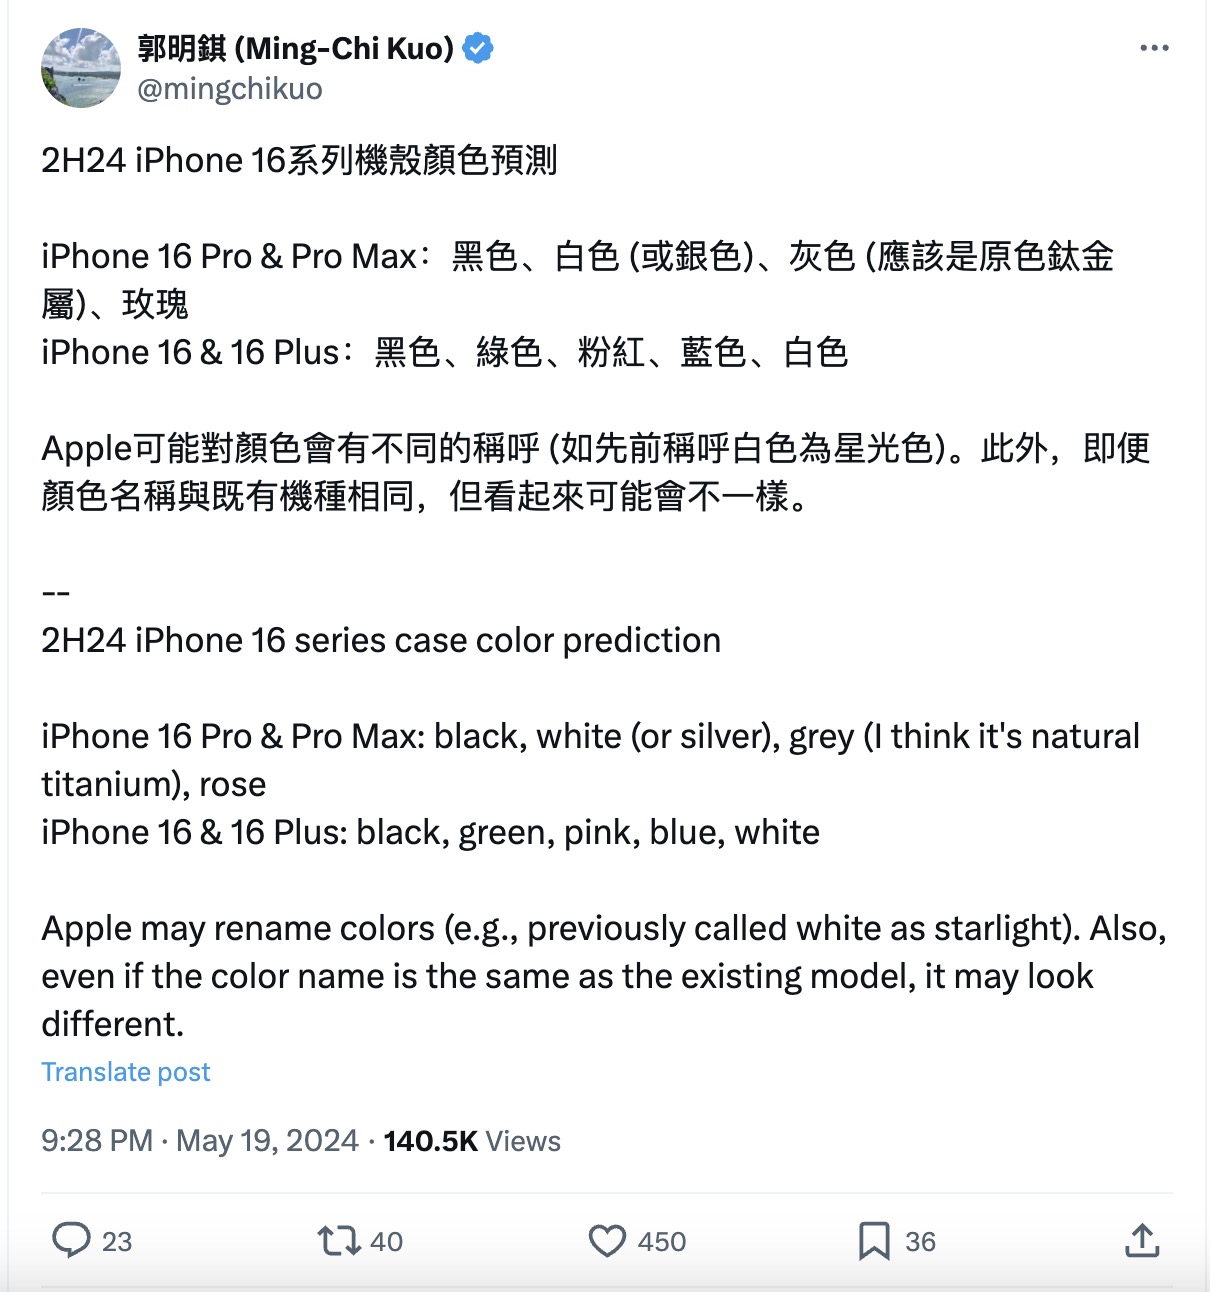 Ming-Chi Kuo tweet on iPhone 16 colors